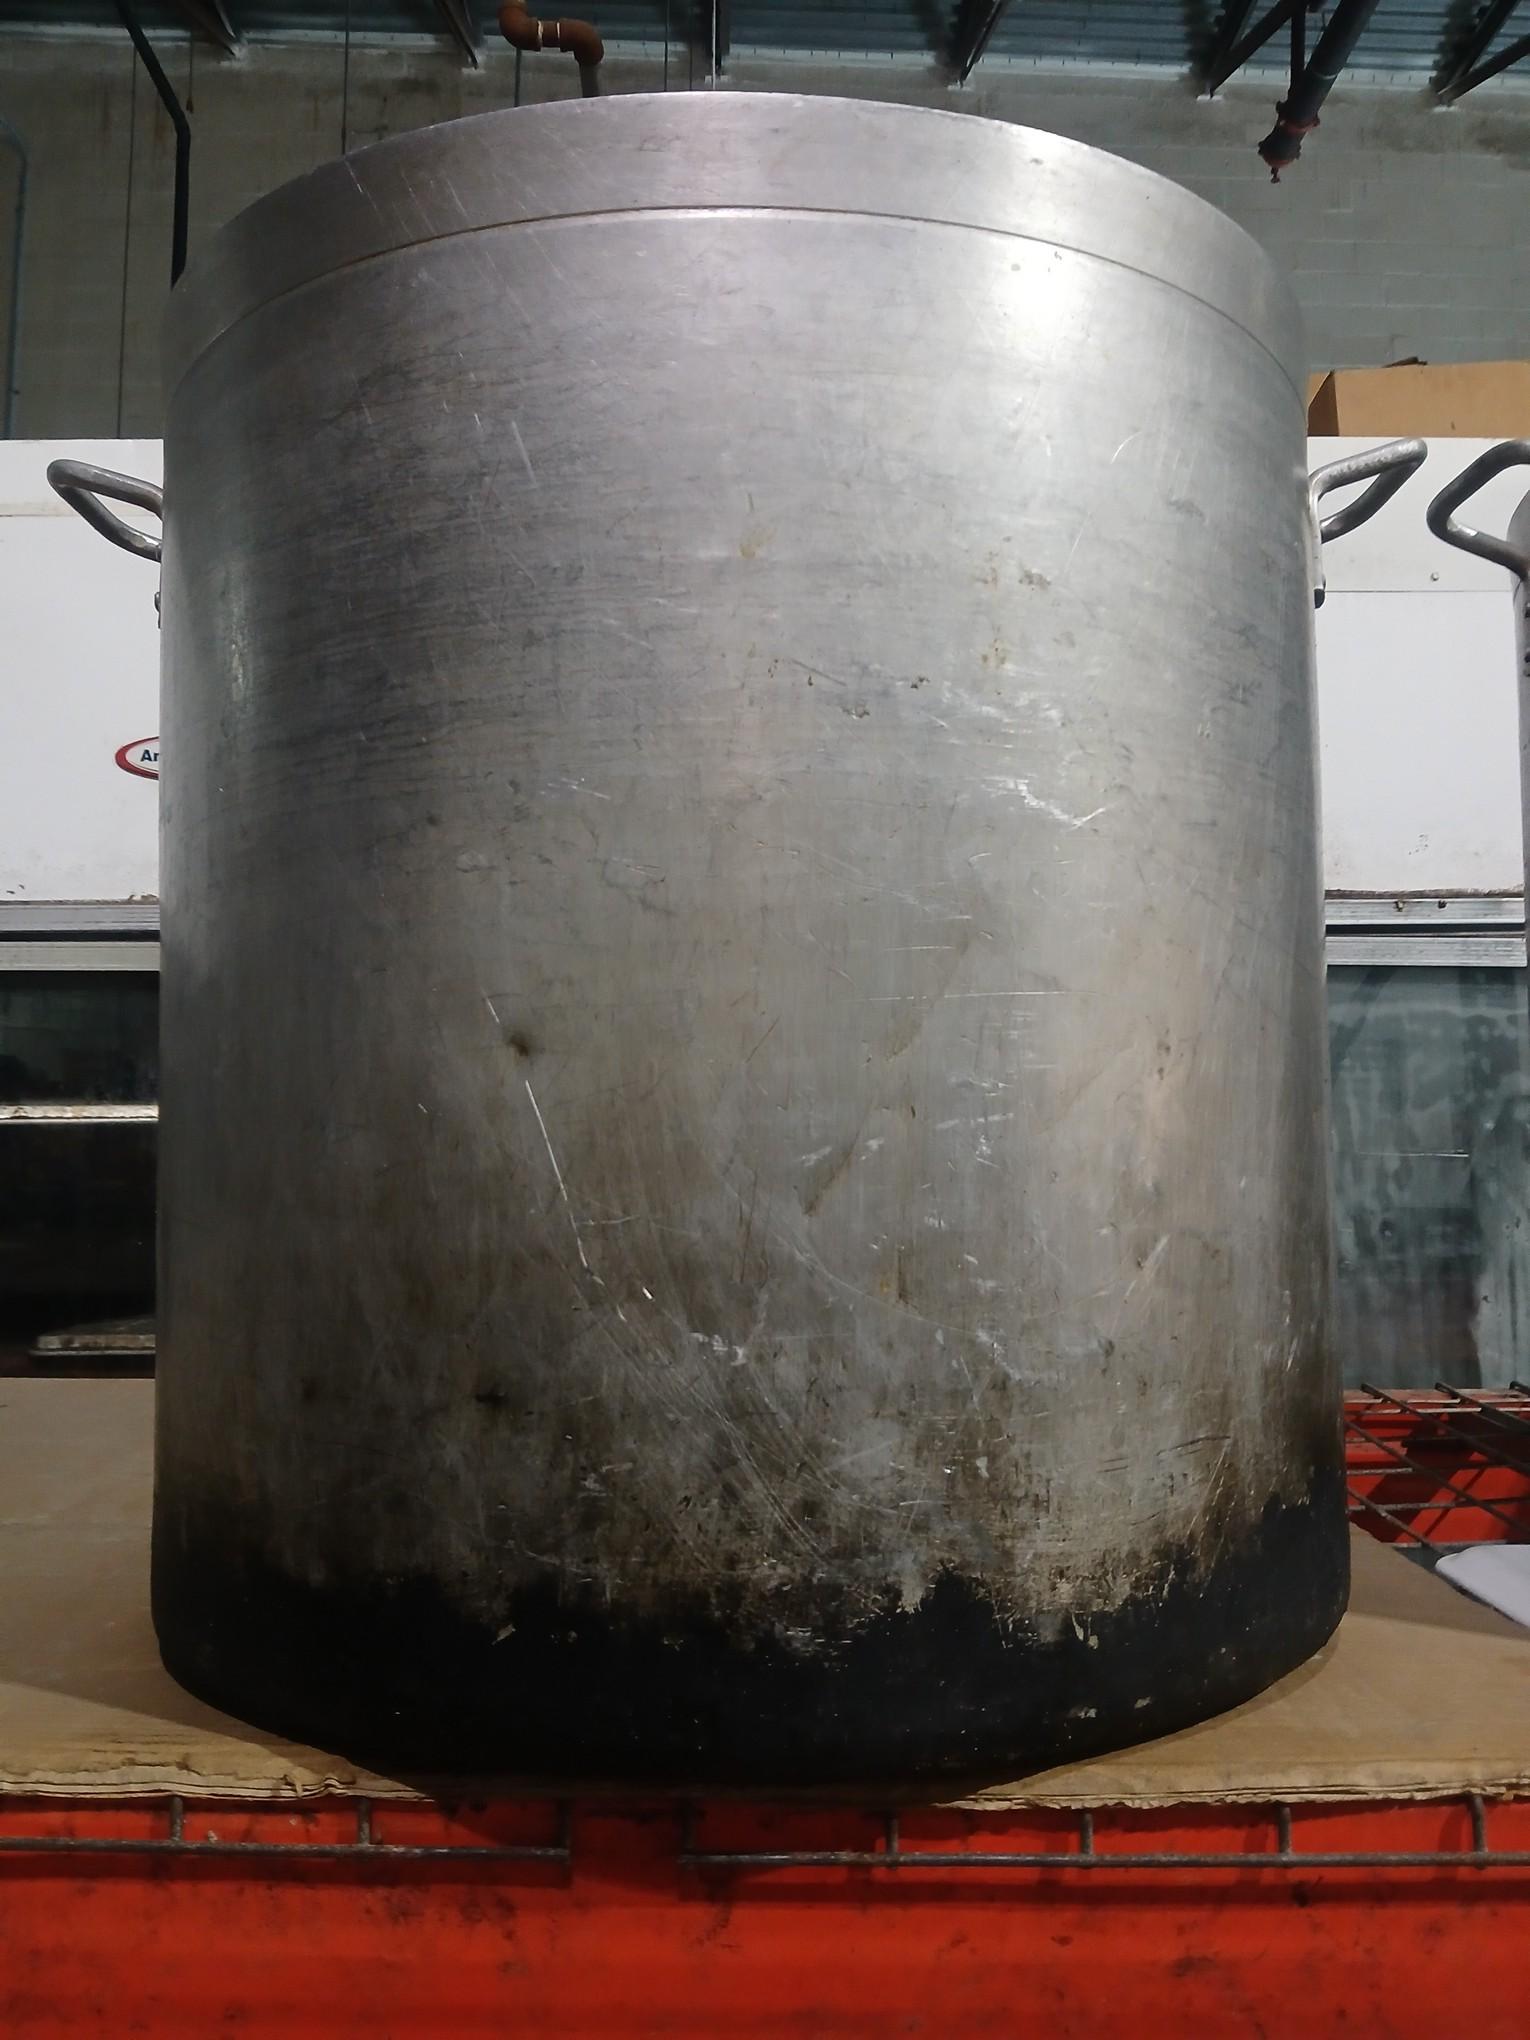 LARGE Stock Pot - Looks to be 80 Quart Pot - Stand 32" Tall and 20" Round - Please see pics for addi